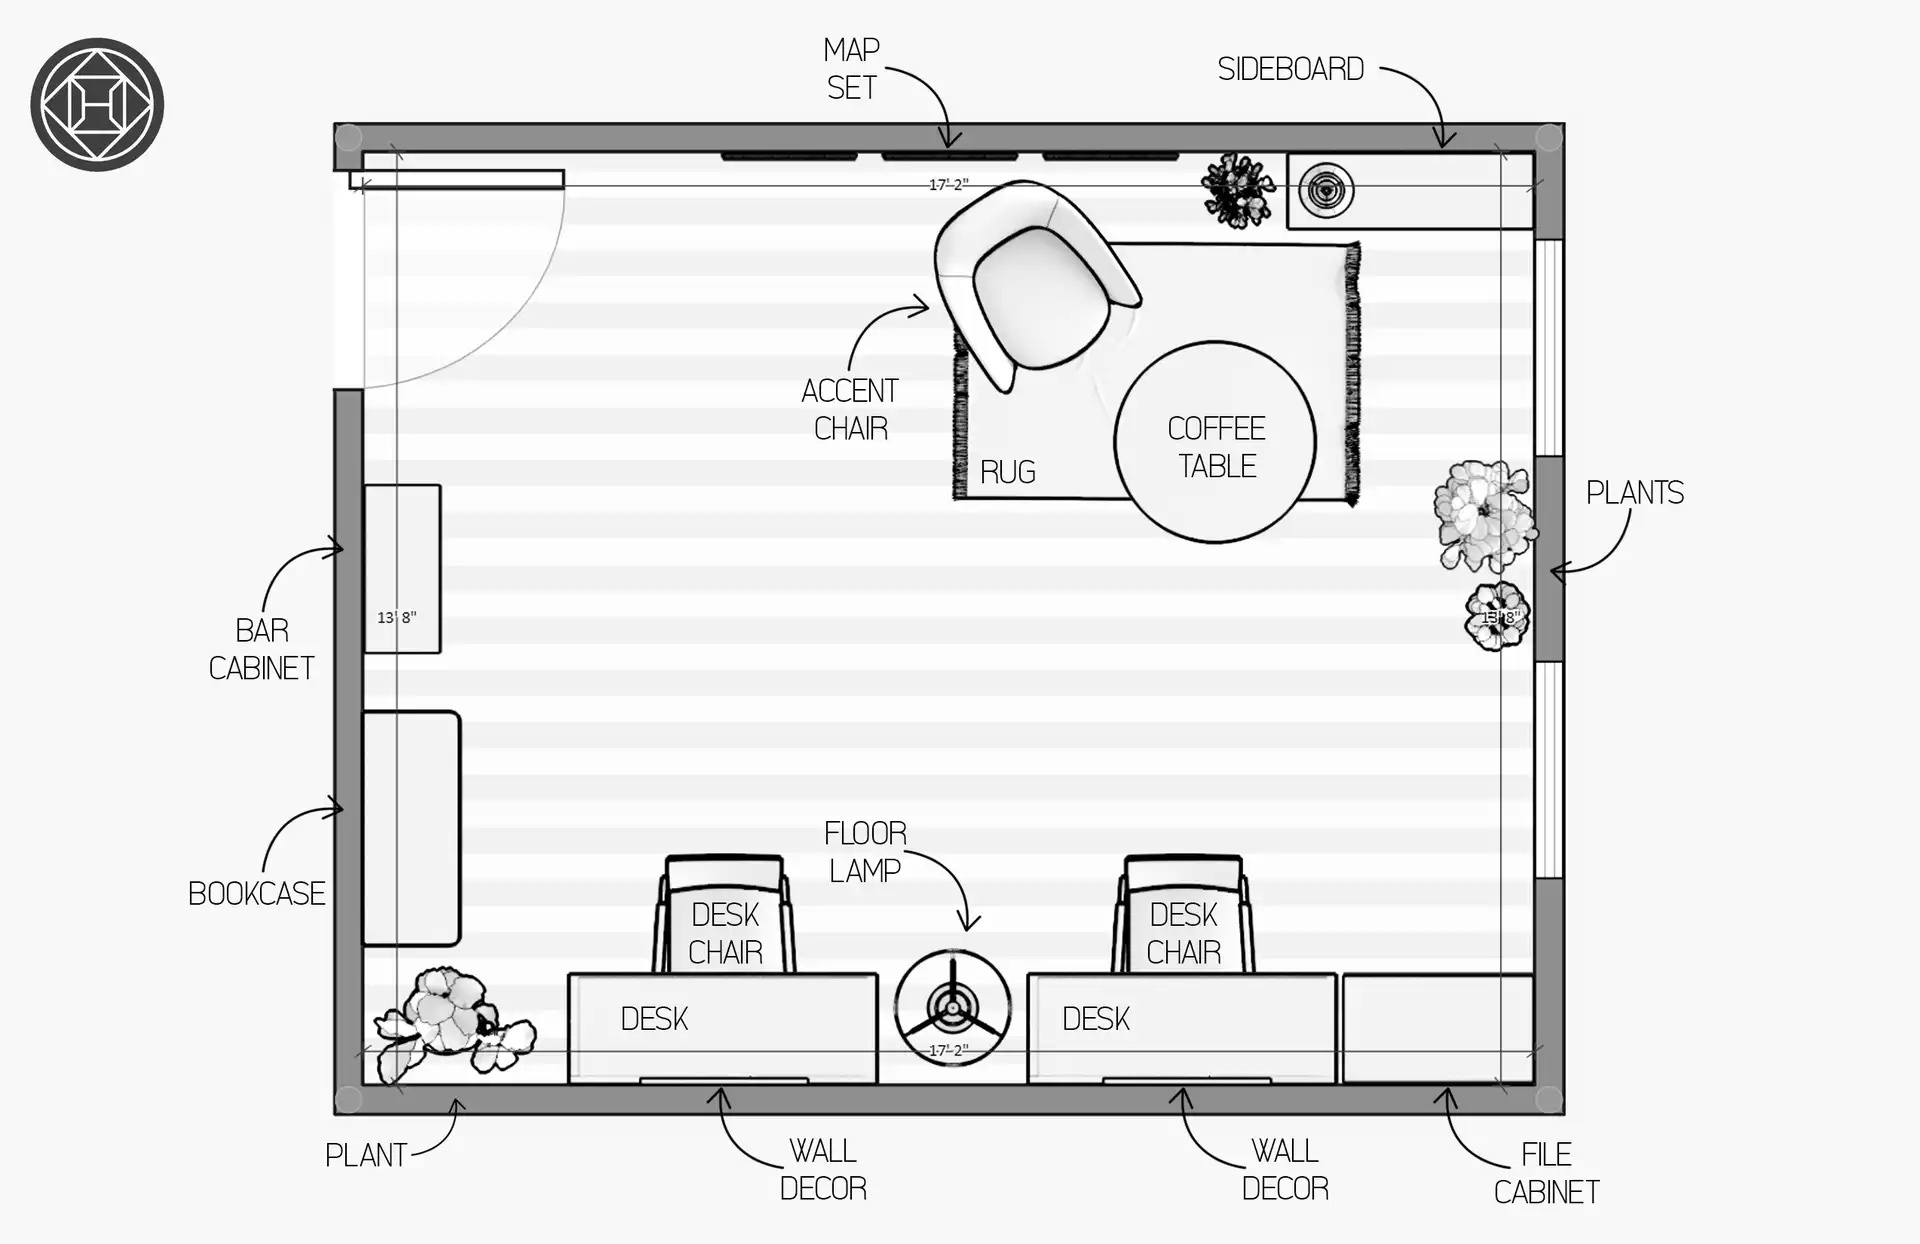 The layout included with Havenly's final design